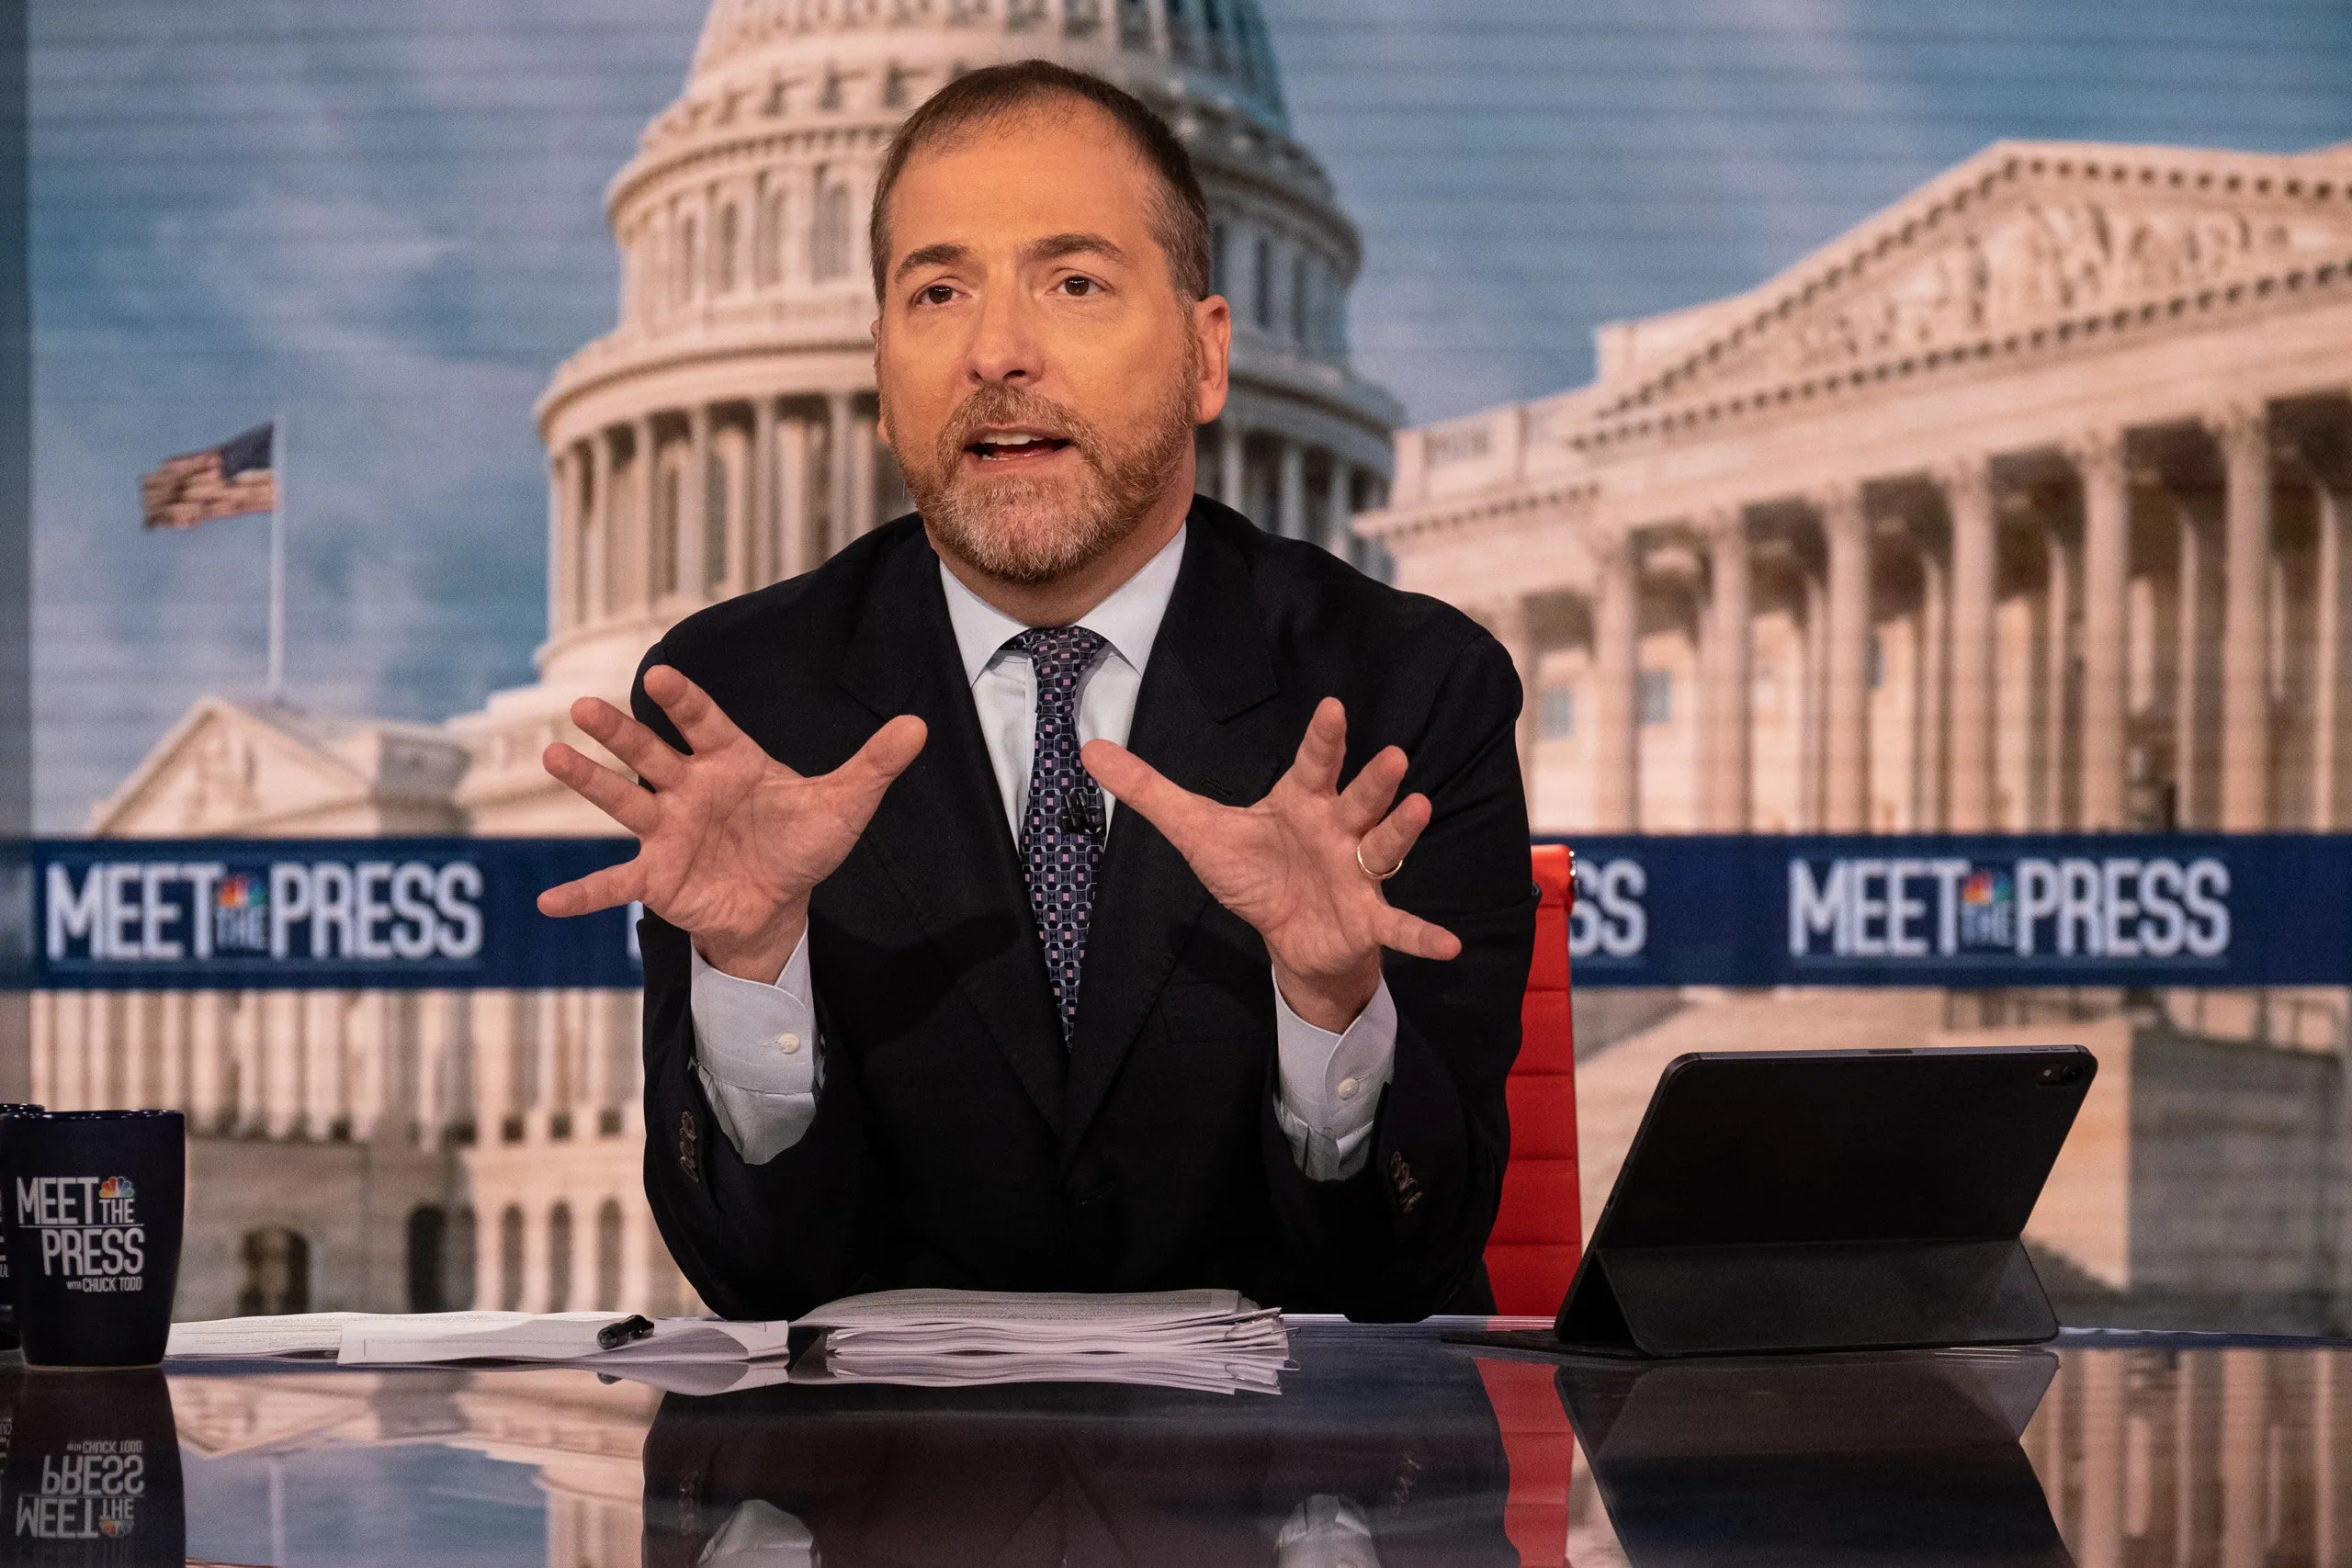 Why Did Chuck Todd Leave Meet the Press?